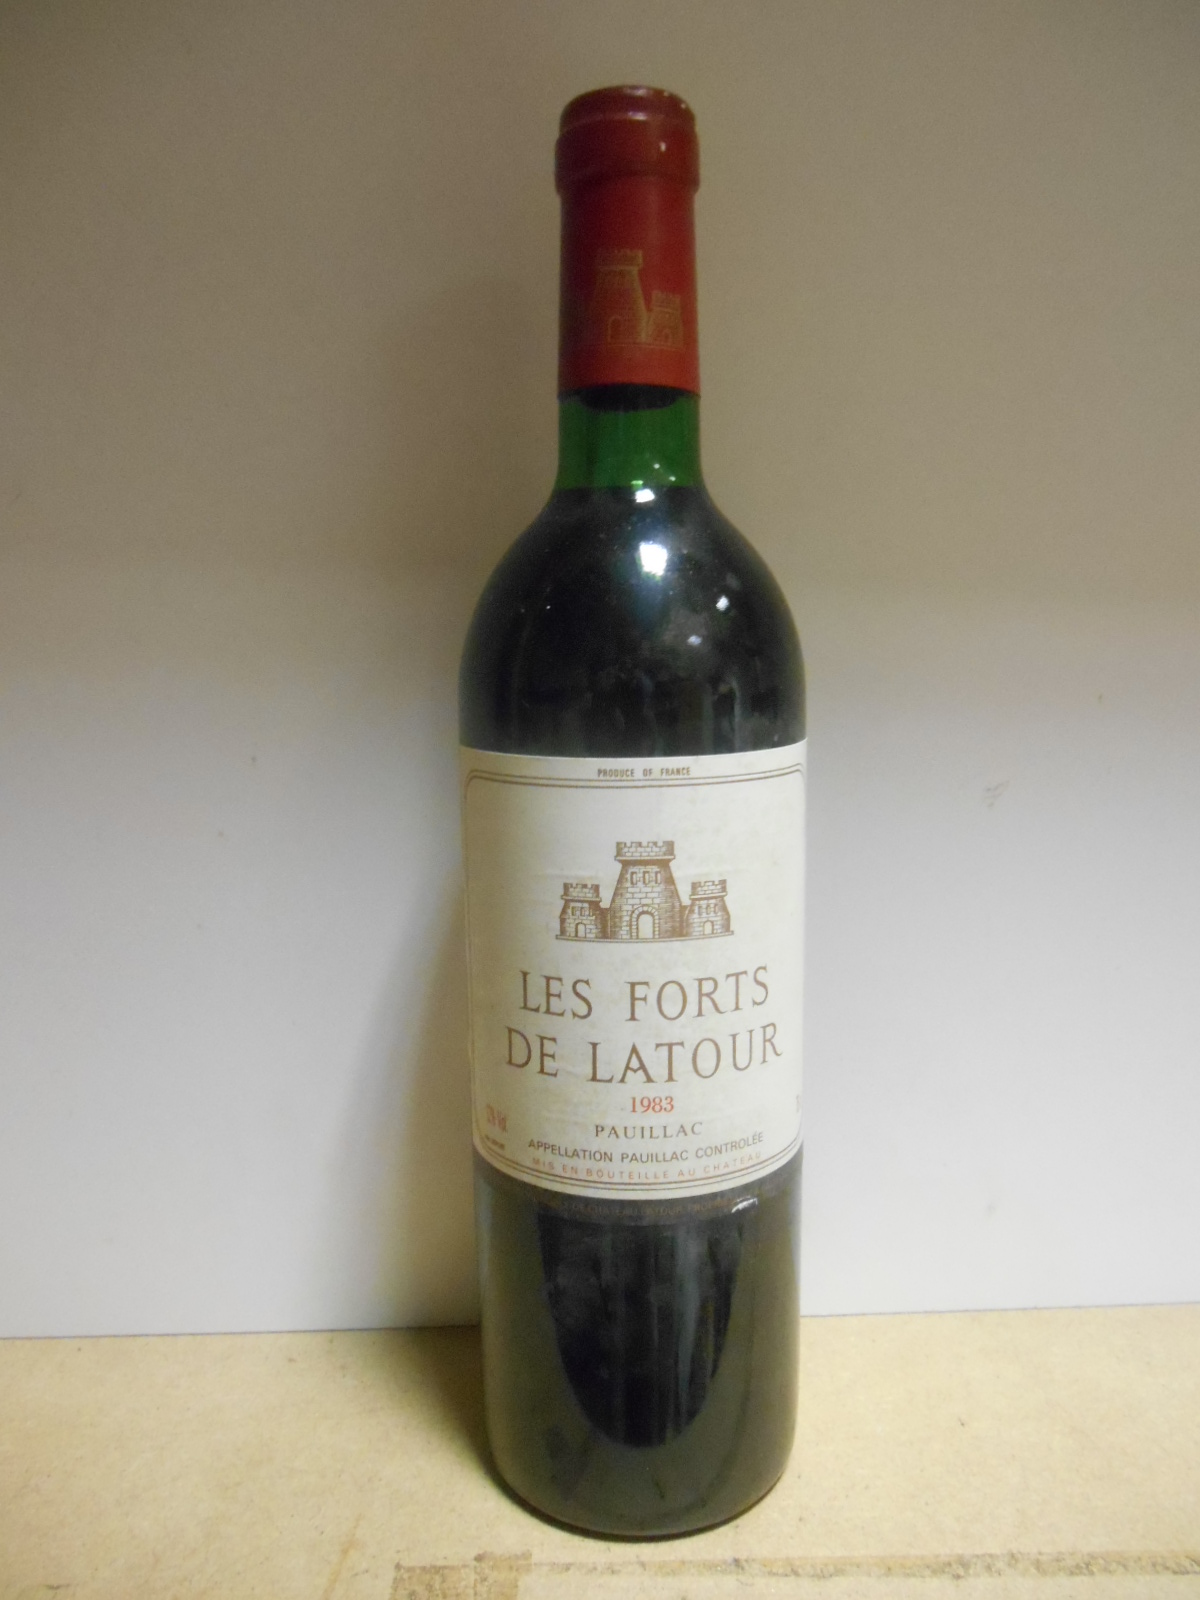 Removed from a College cellar. Les Forts de Latour, Pauillac 1983, one bottle